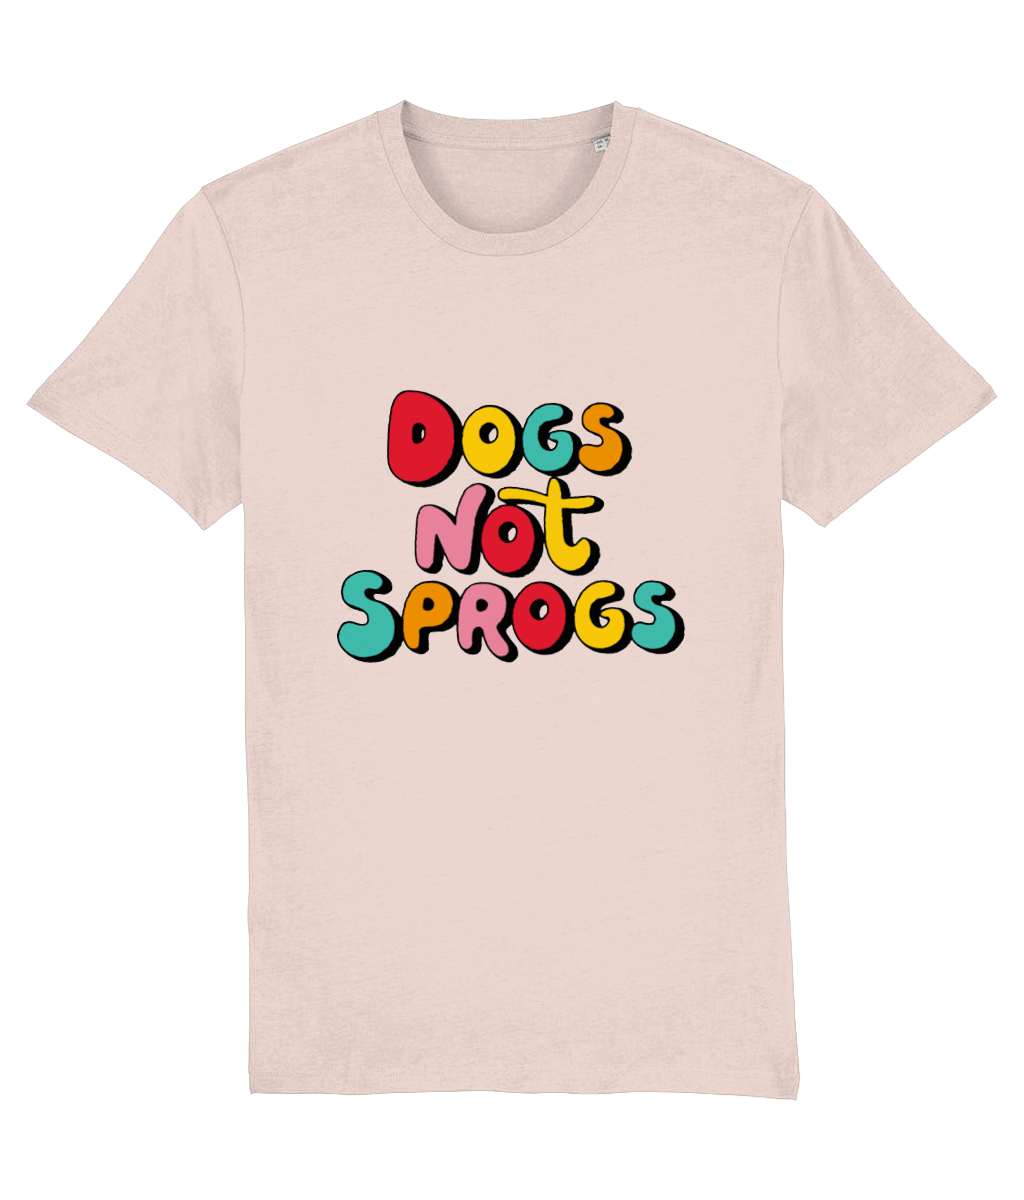 DOGS NOT SPROGS T- shirt